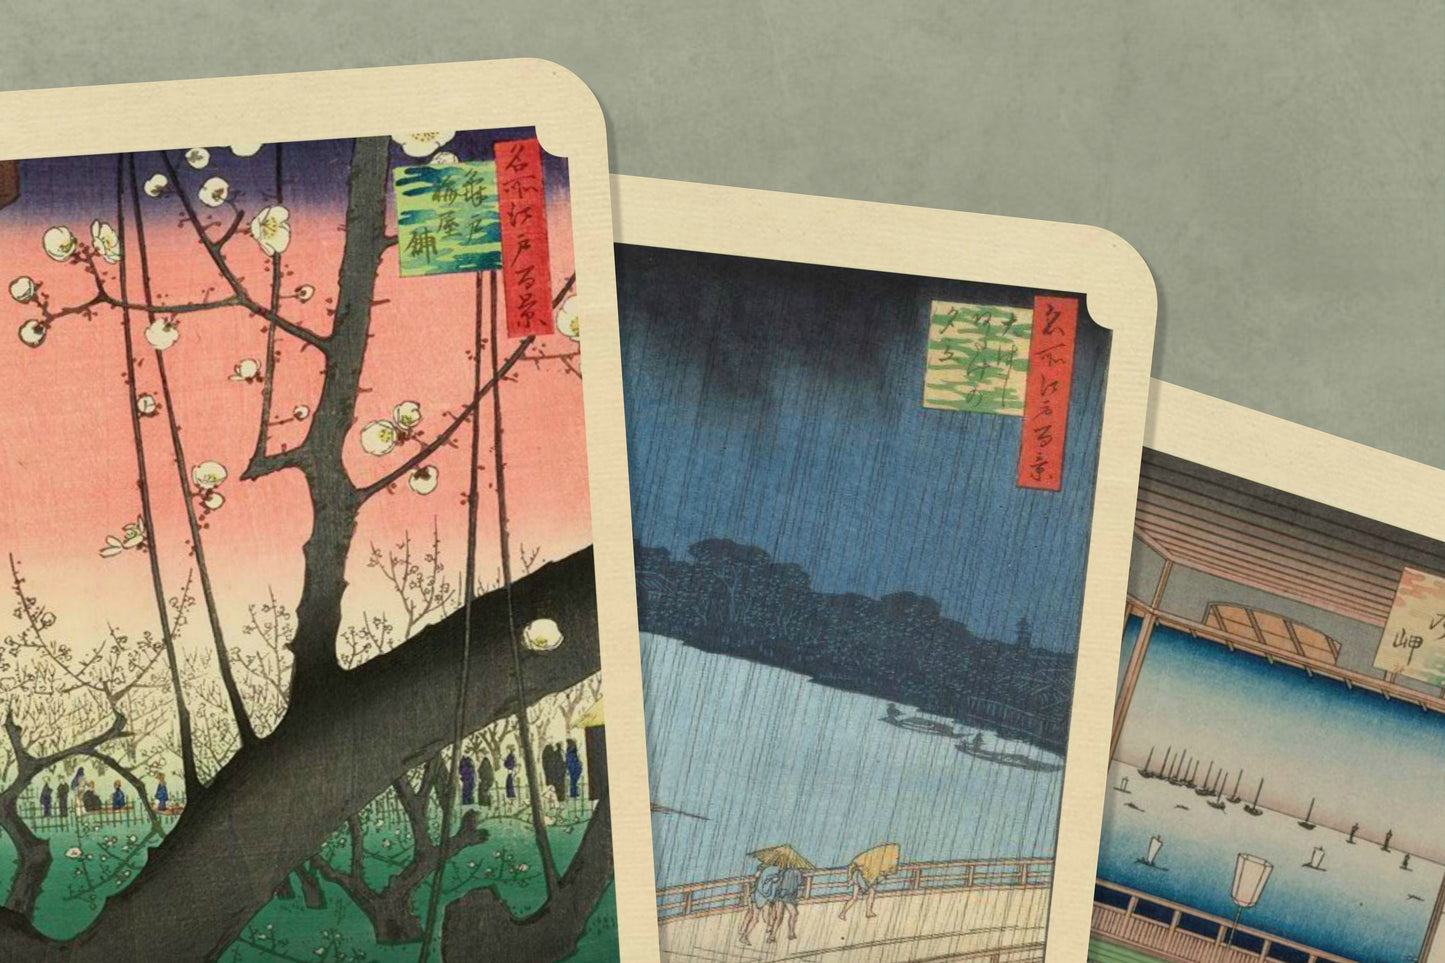 Moments of Zen - An Oracle Deck by Andō Hiroshige